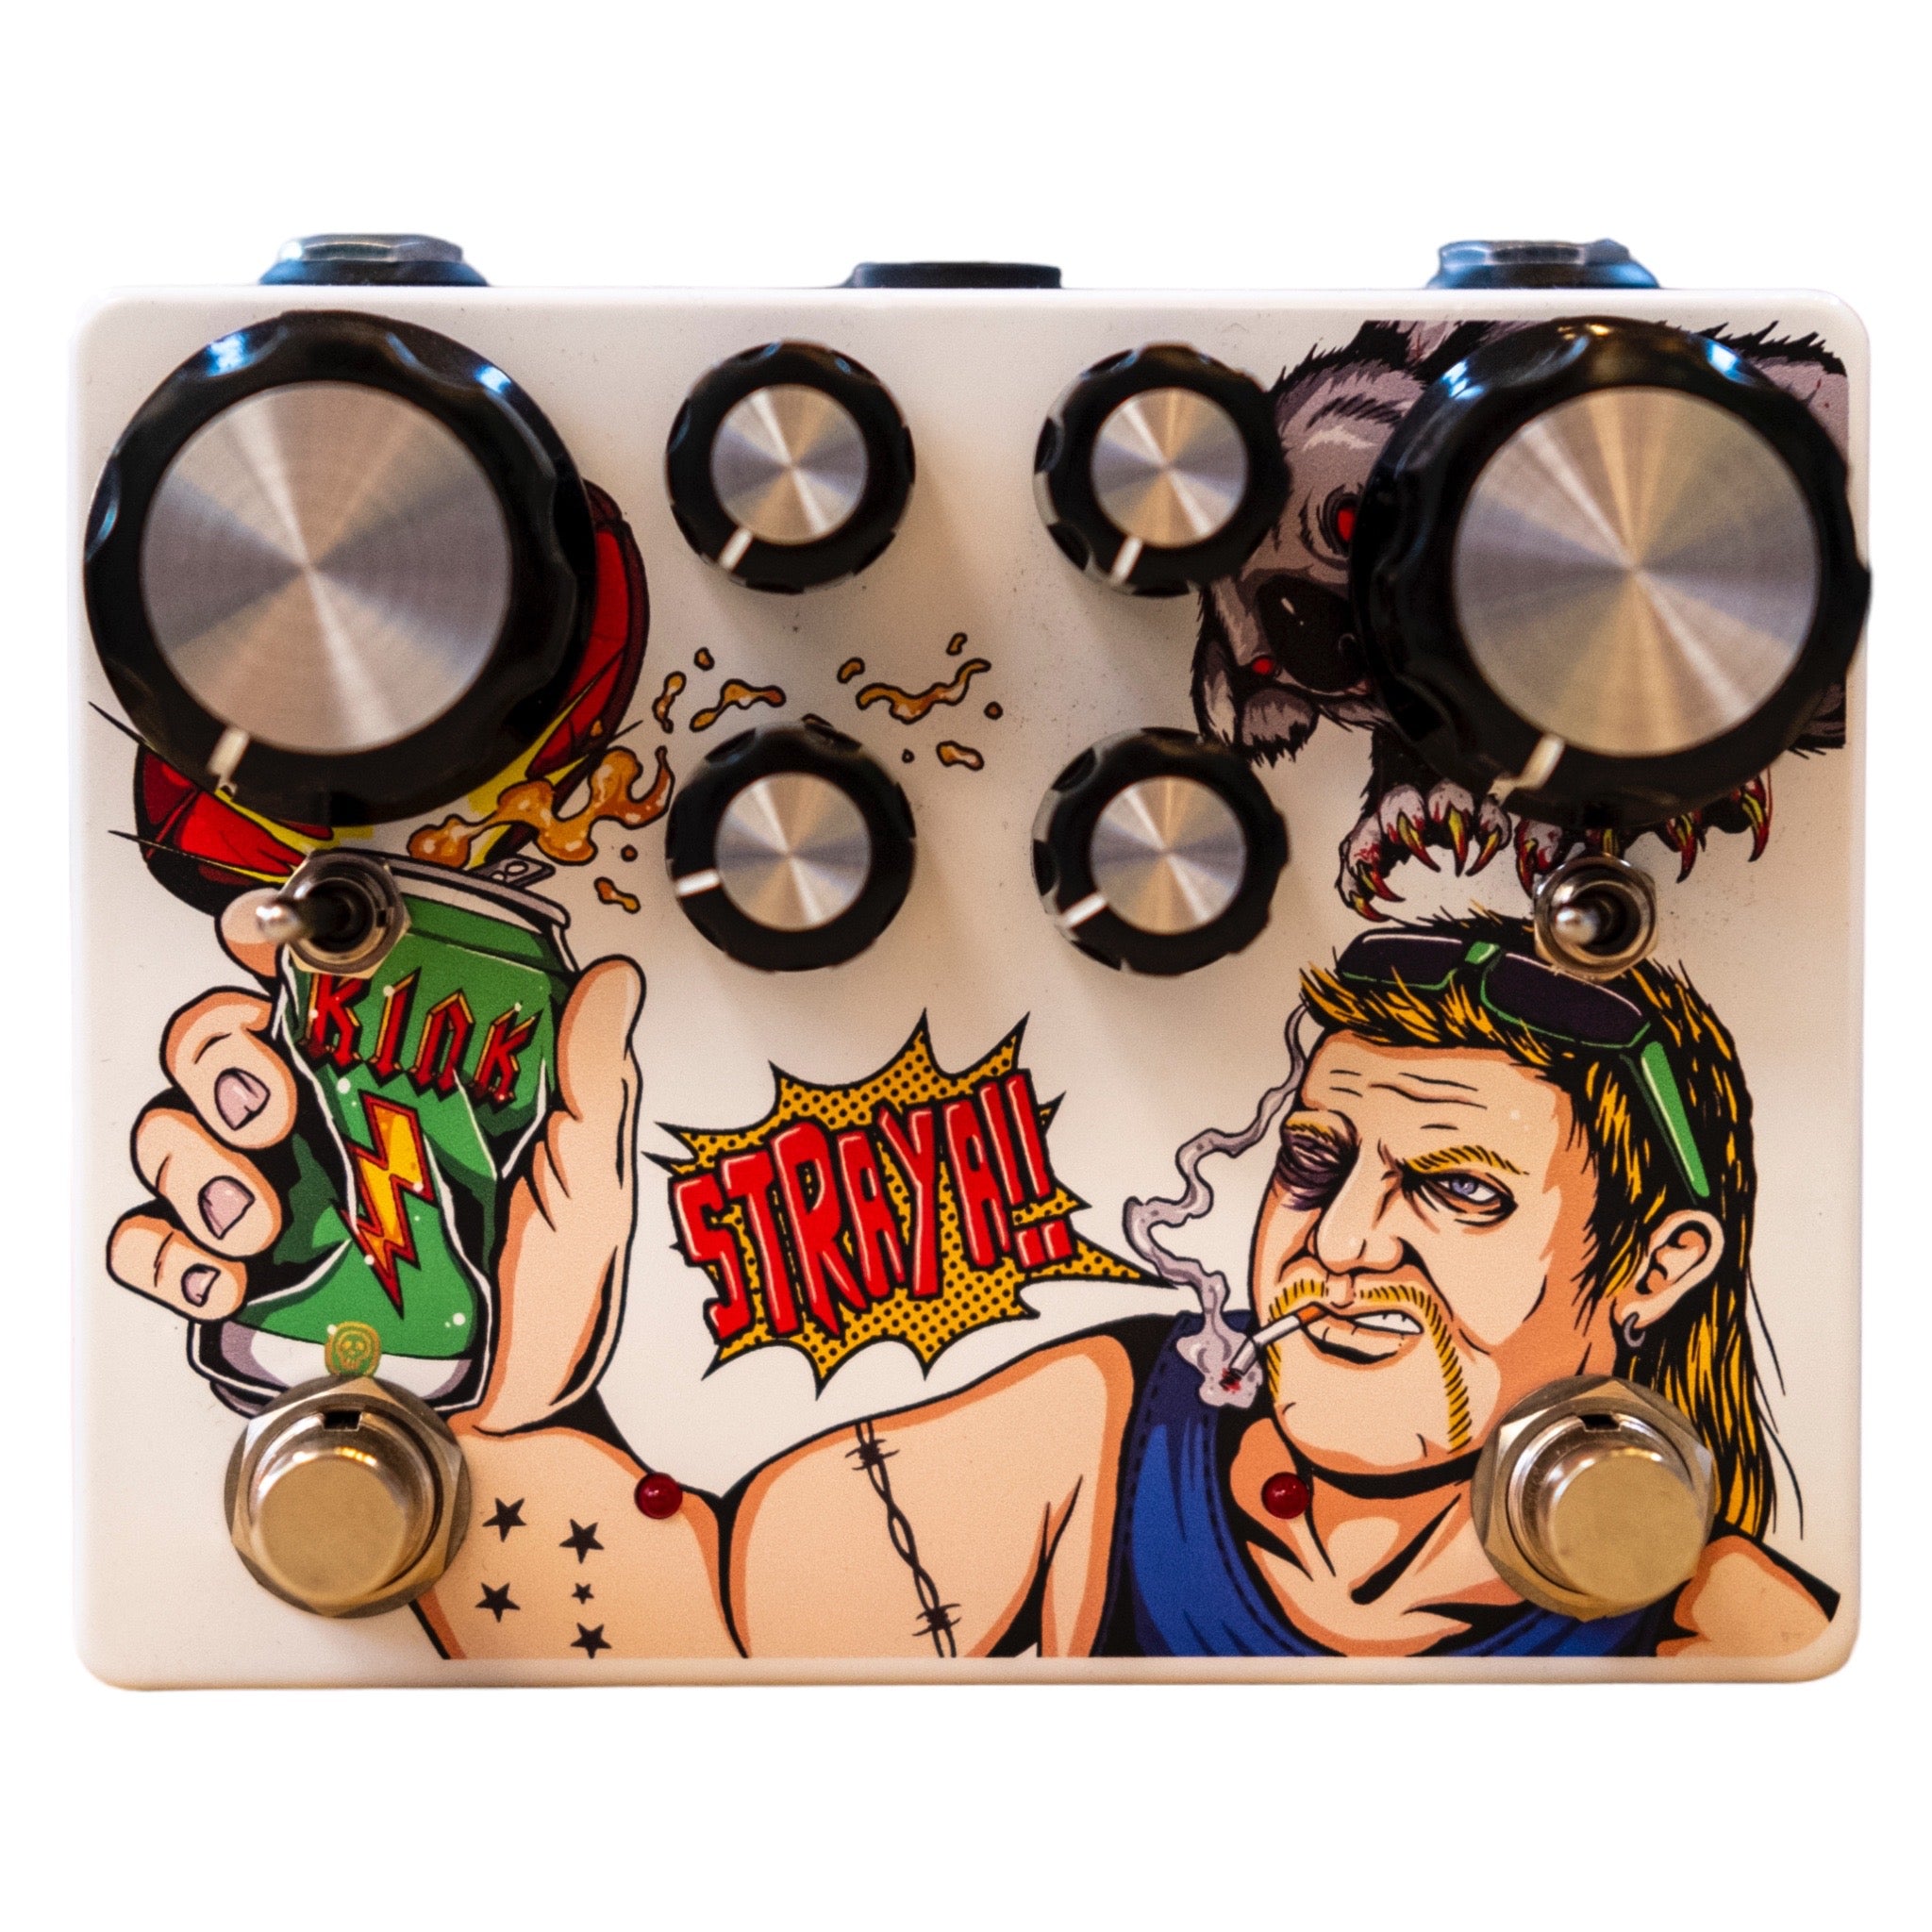 Kink Guitar Pedals Straya Dual Overdrive Pedal